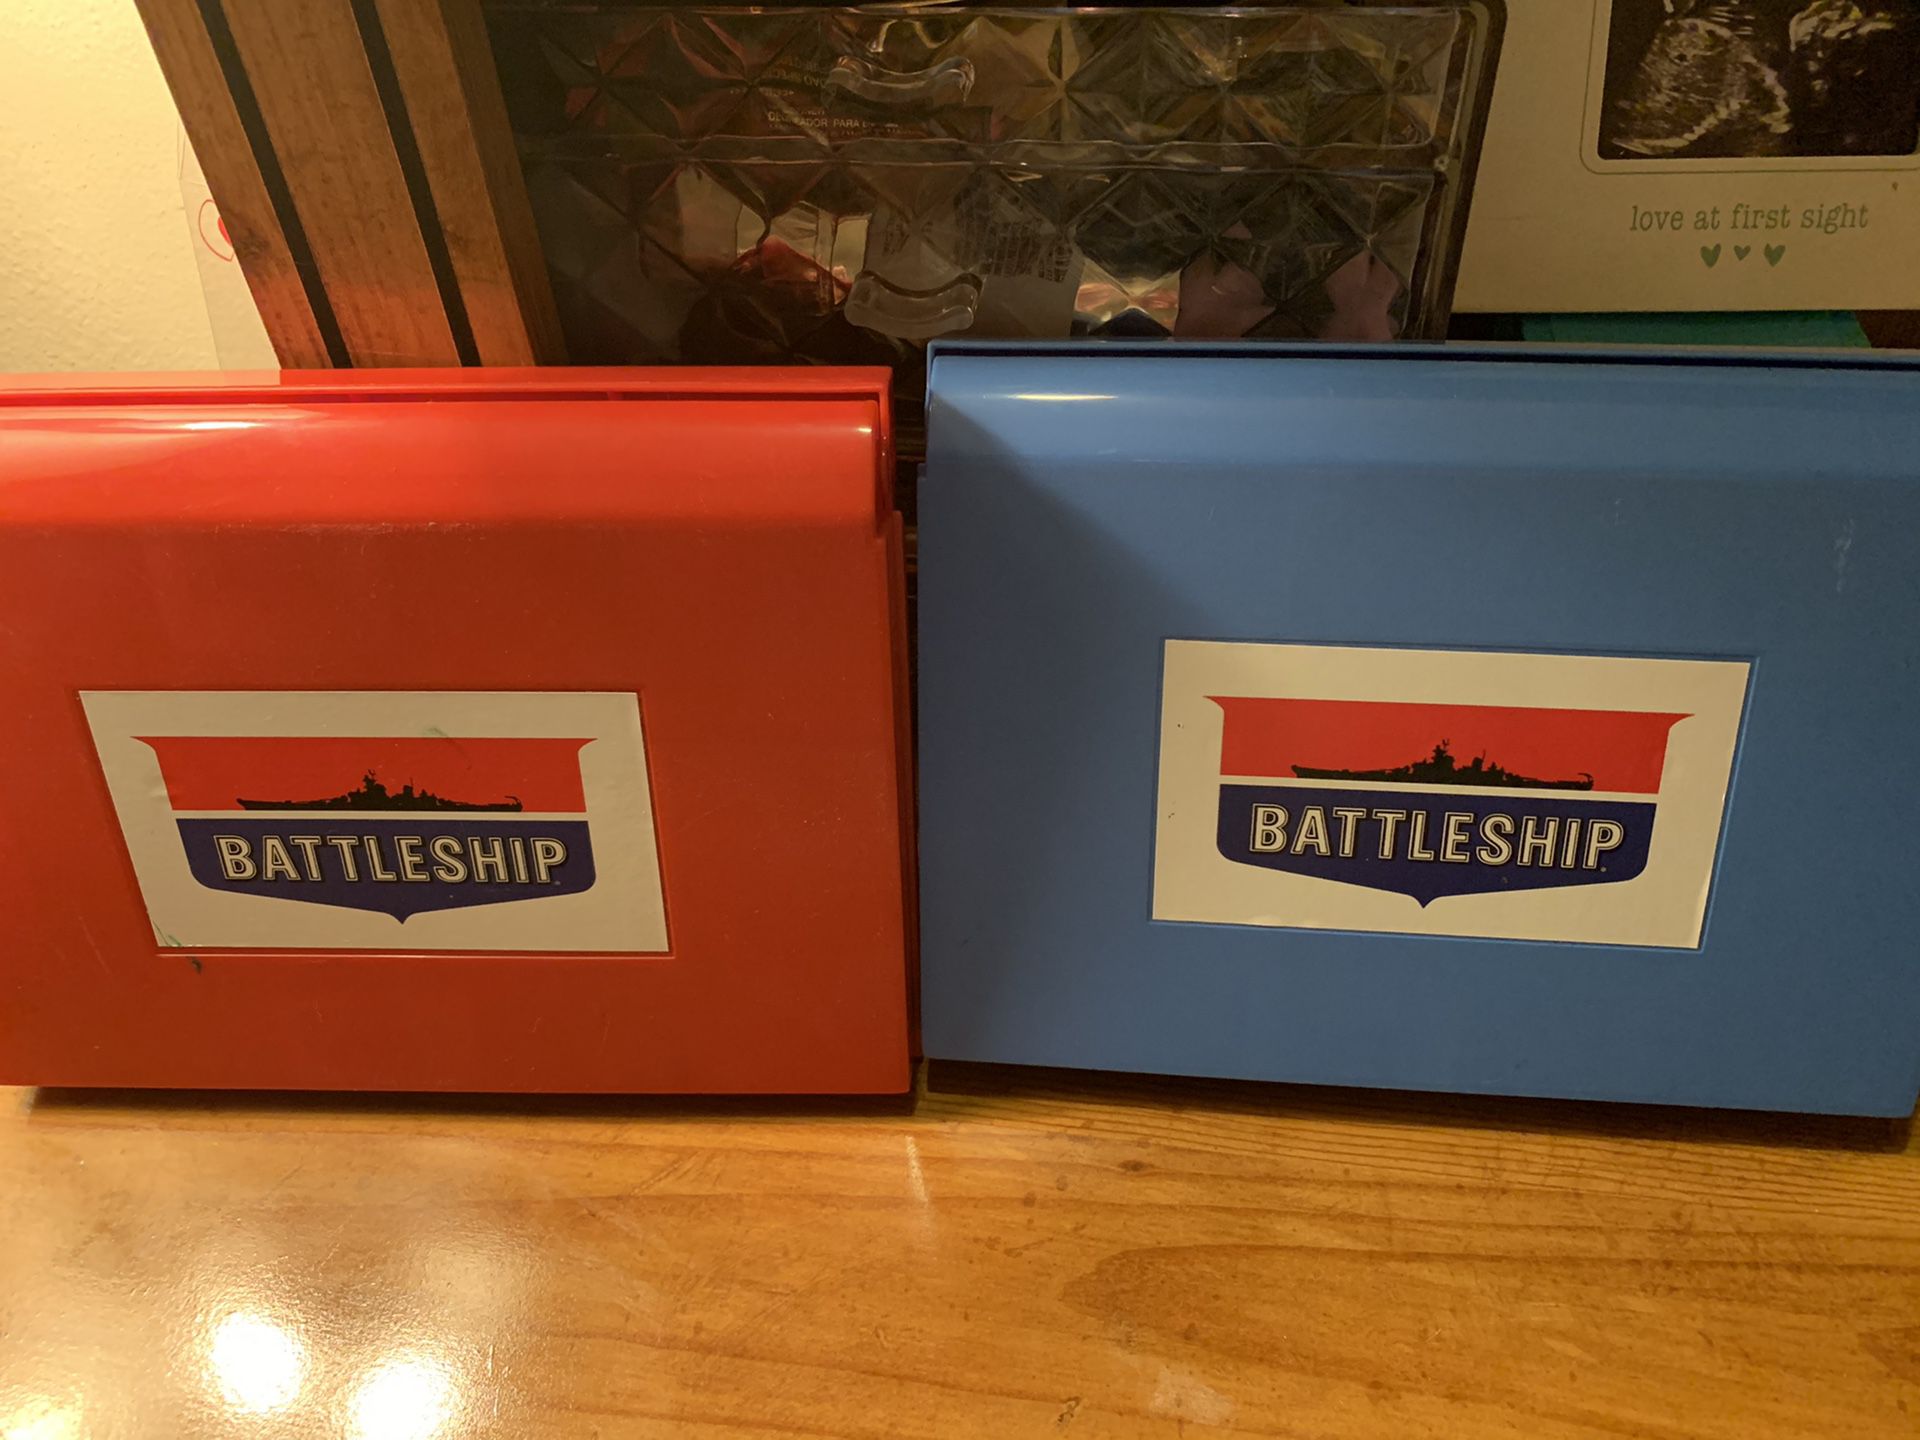 Battleship game for kids to play with